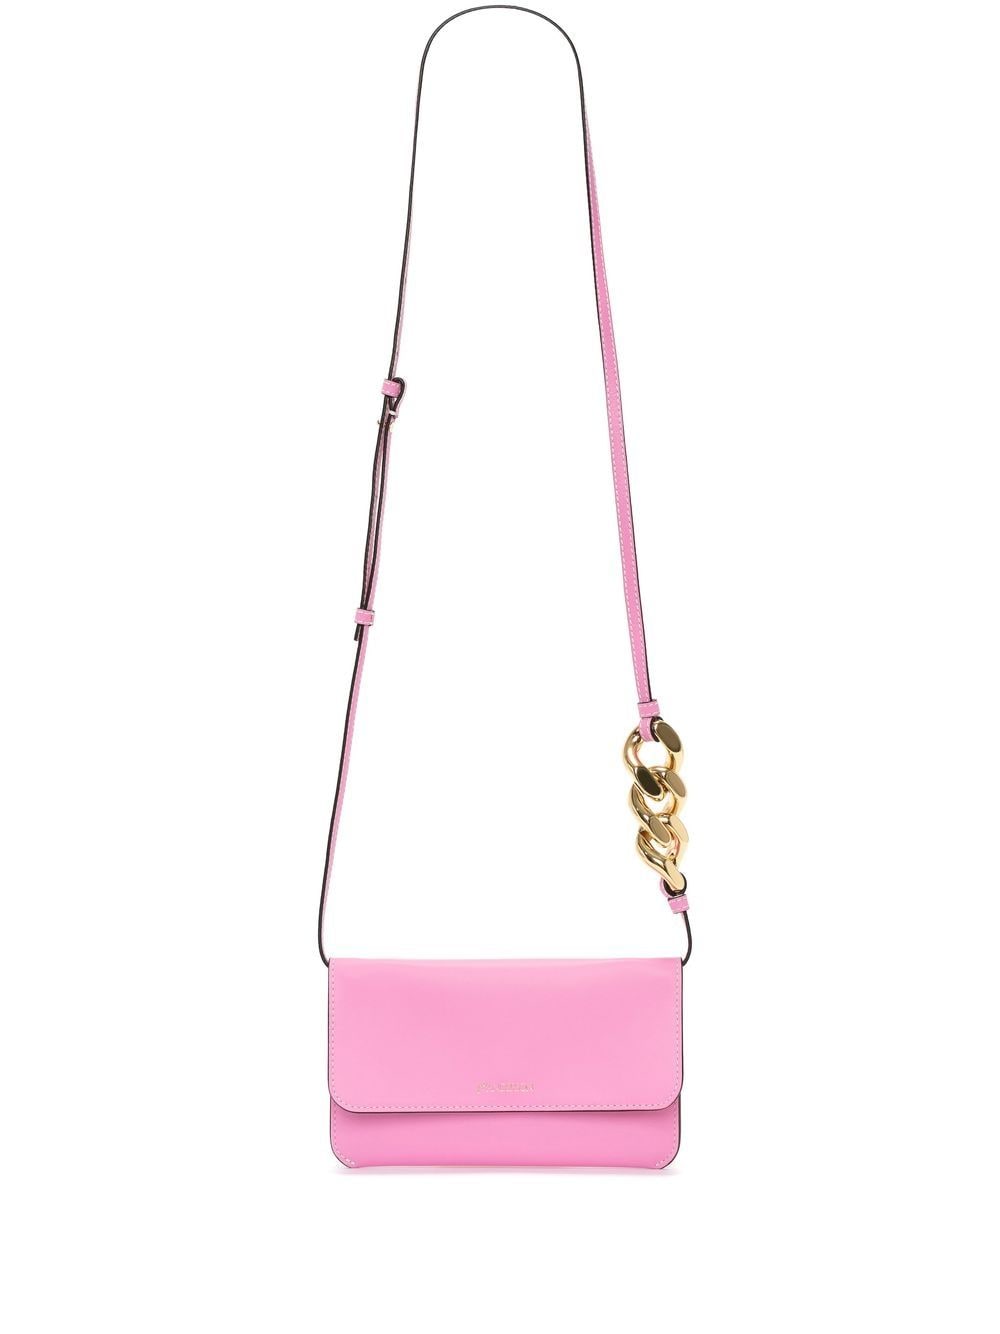 JW Anderson chain-detail phone bag - Pink